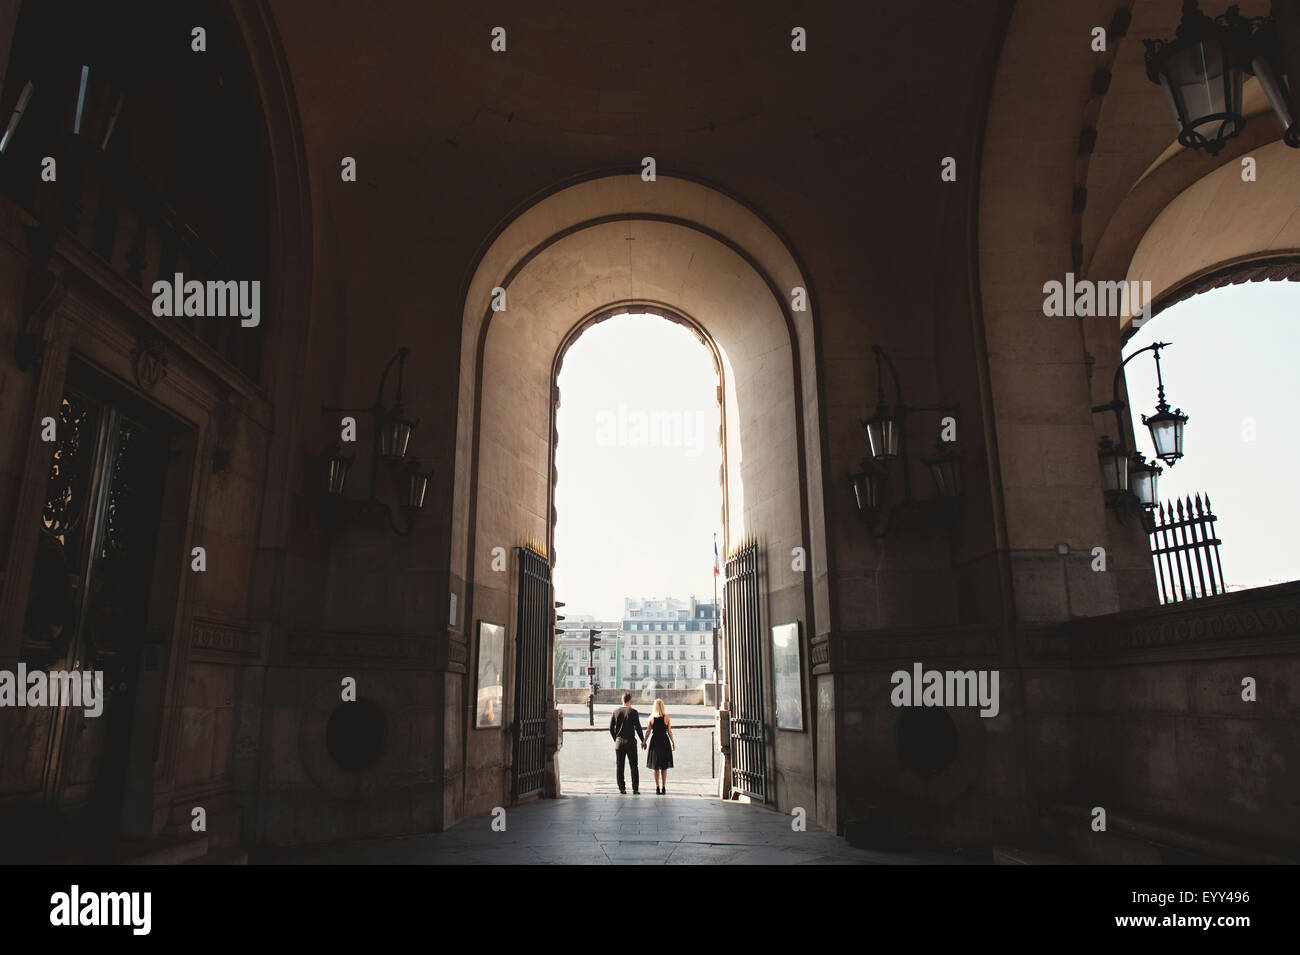 Caucasian couple standing in archway église Banque D'Images